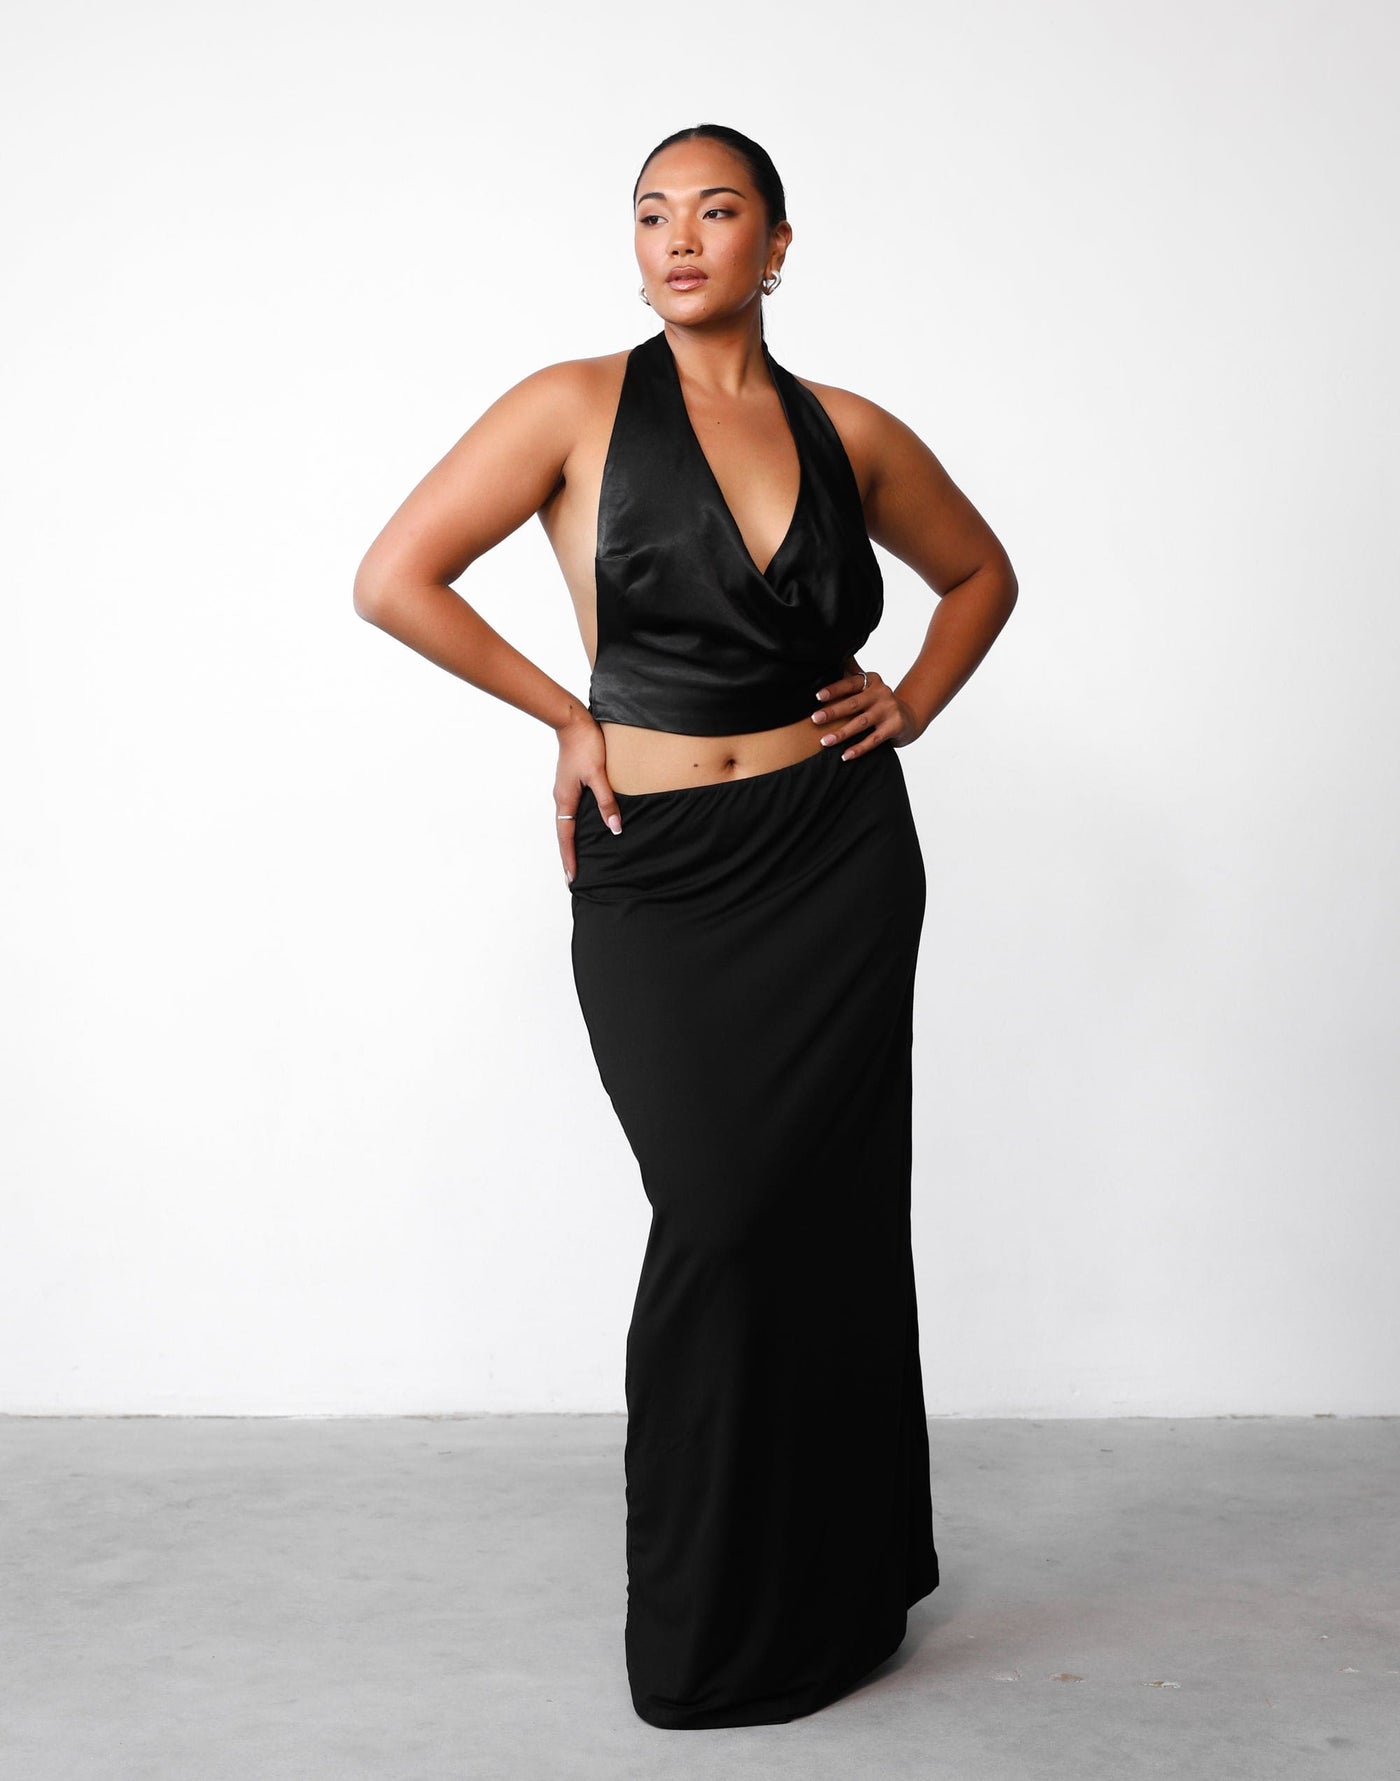 Heidi Halter Top (Black) | Charcoal Clothing Exclusive - Cowl Neck Backless Satin Top - Women's Top - Charcoal Clothing